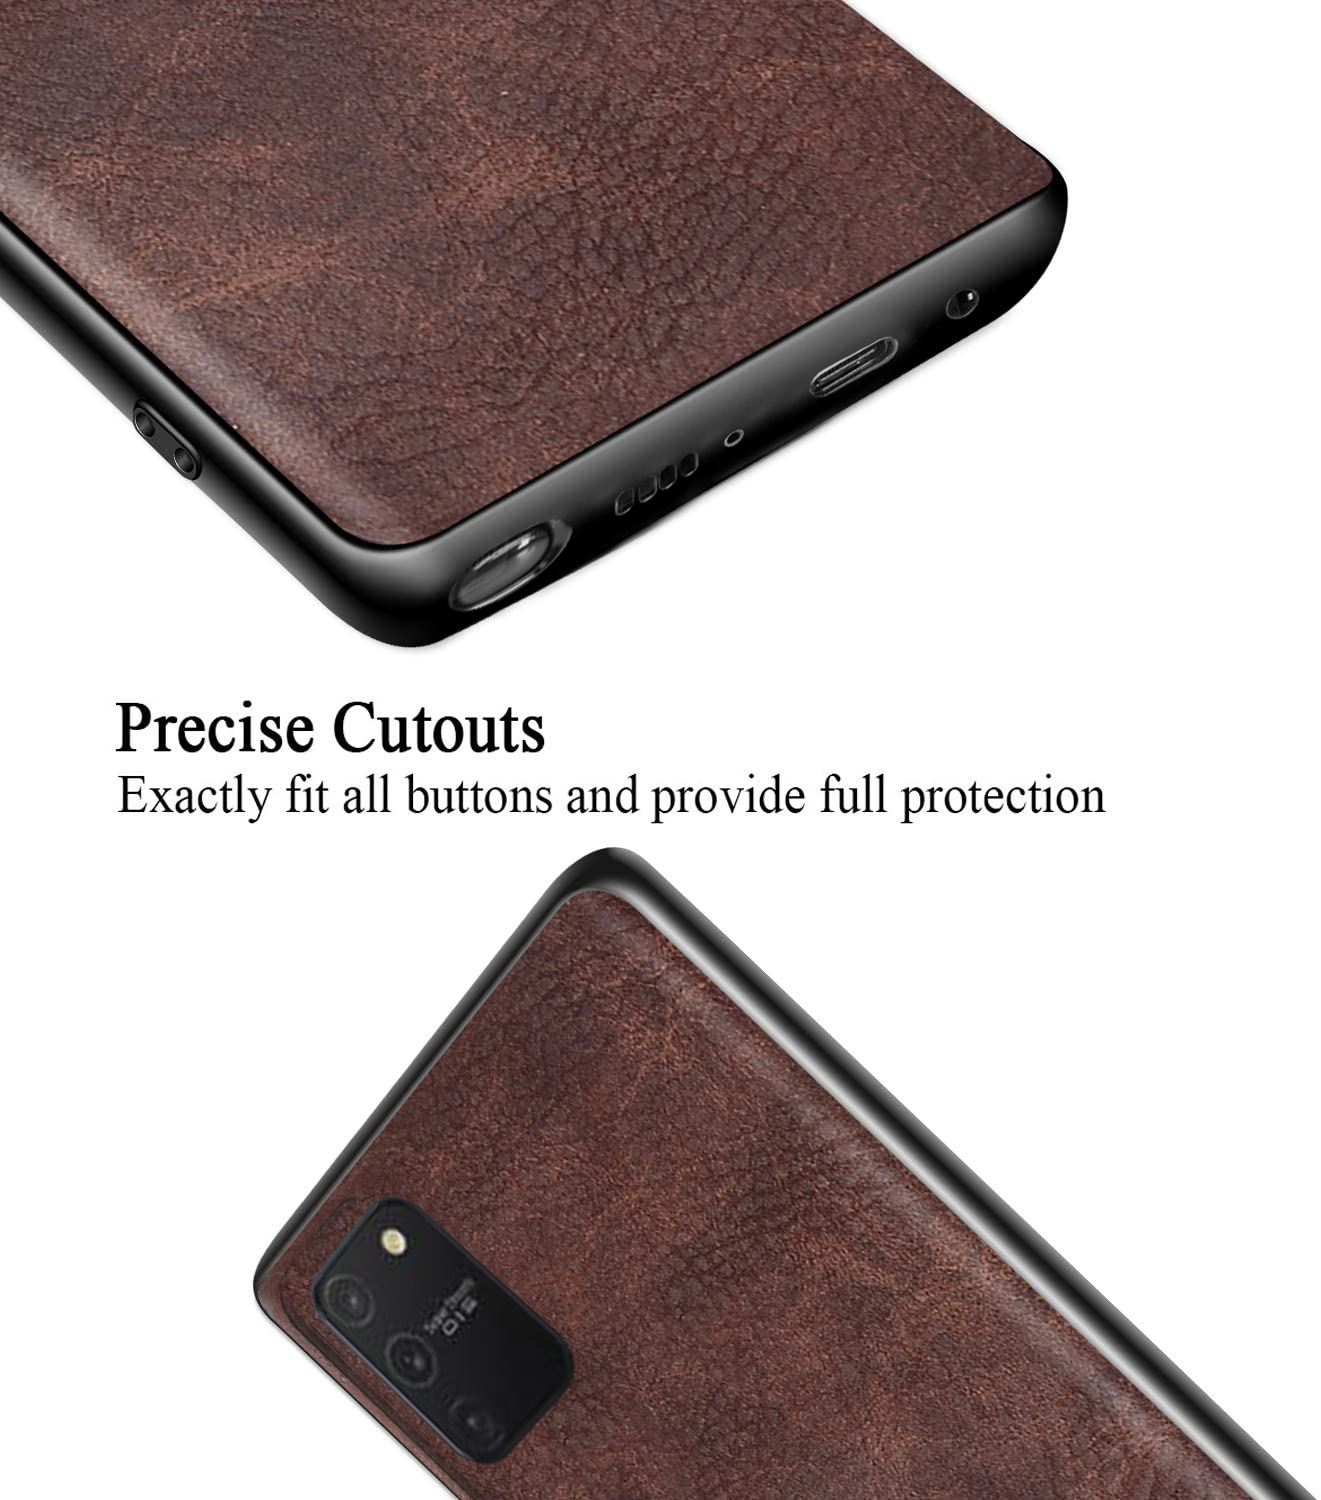 Samsung Galaxy S10 Lite 360 degree protection leather back cover by excelsior